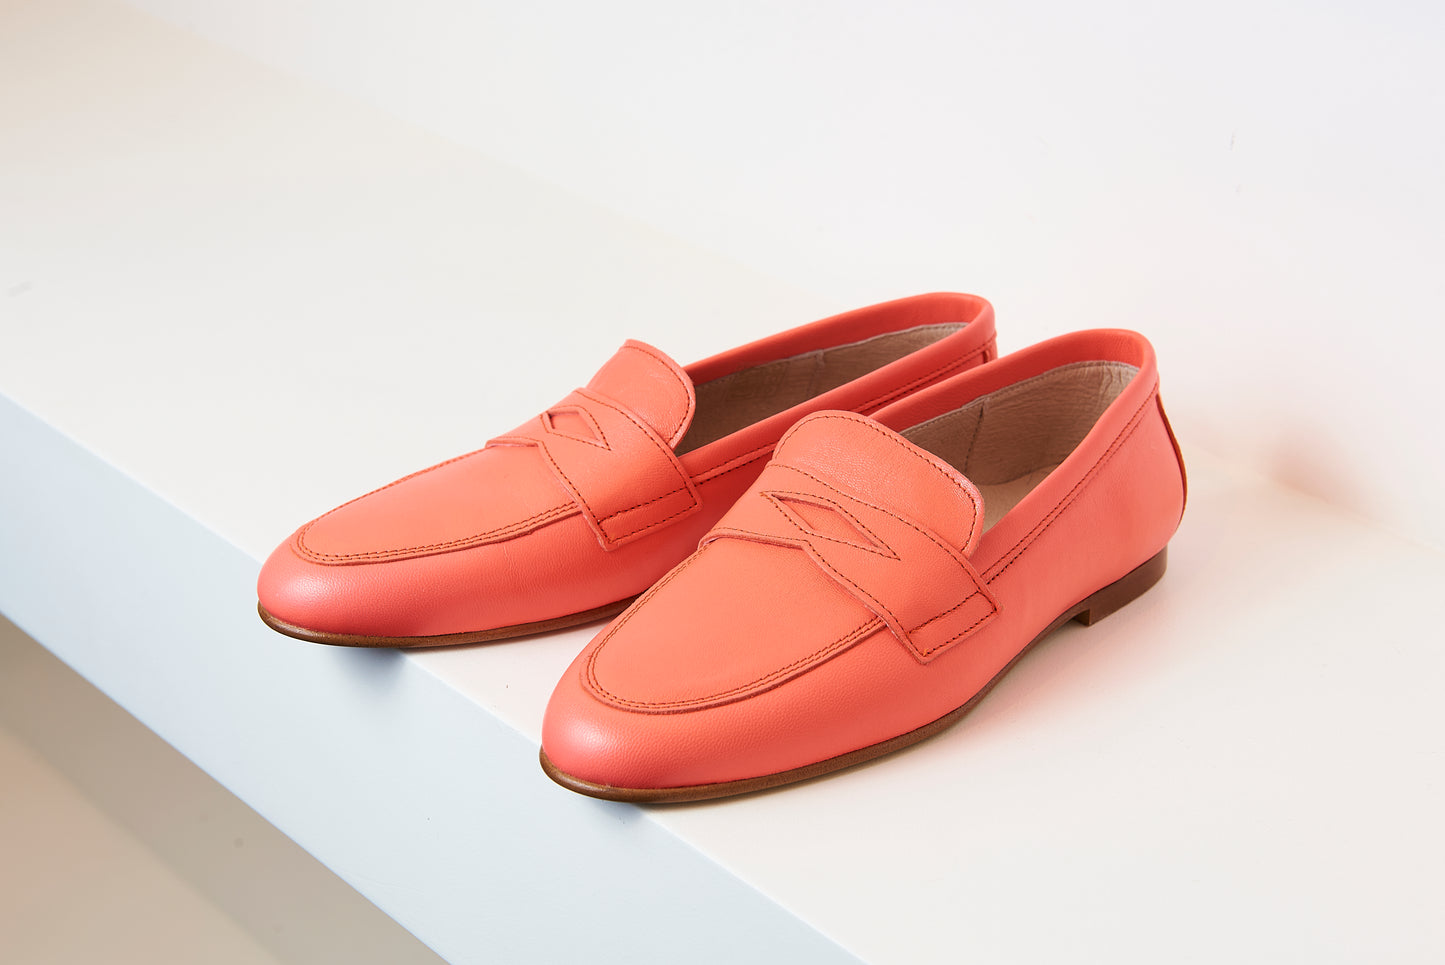 Don Louis Neon Pink Penny Loafer